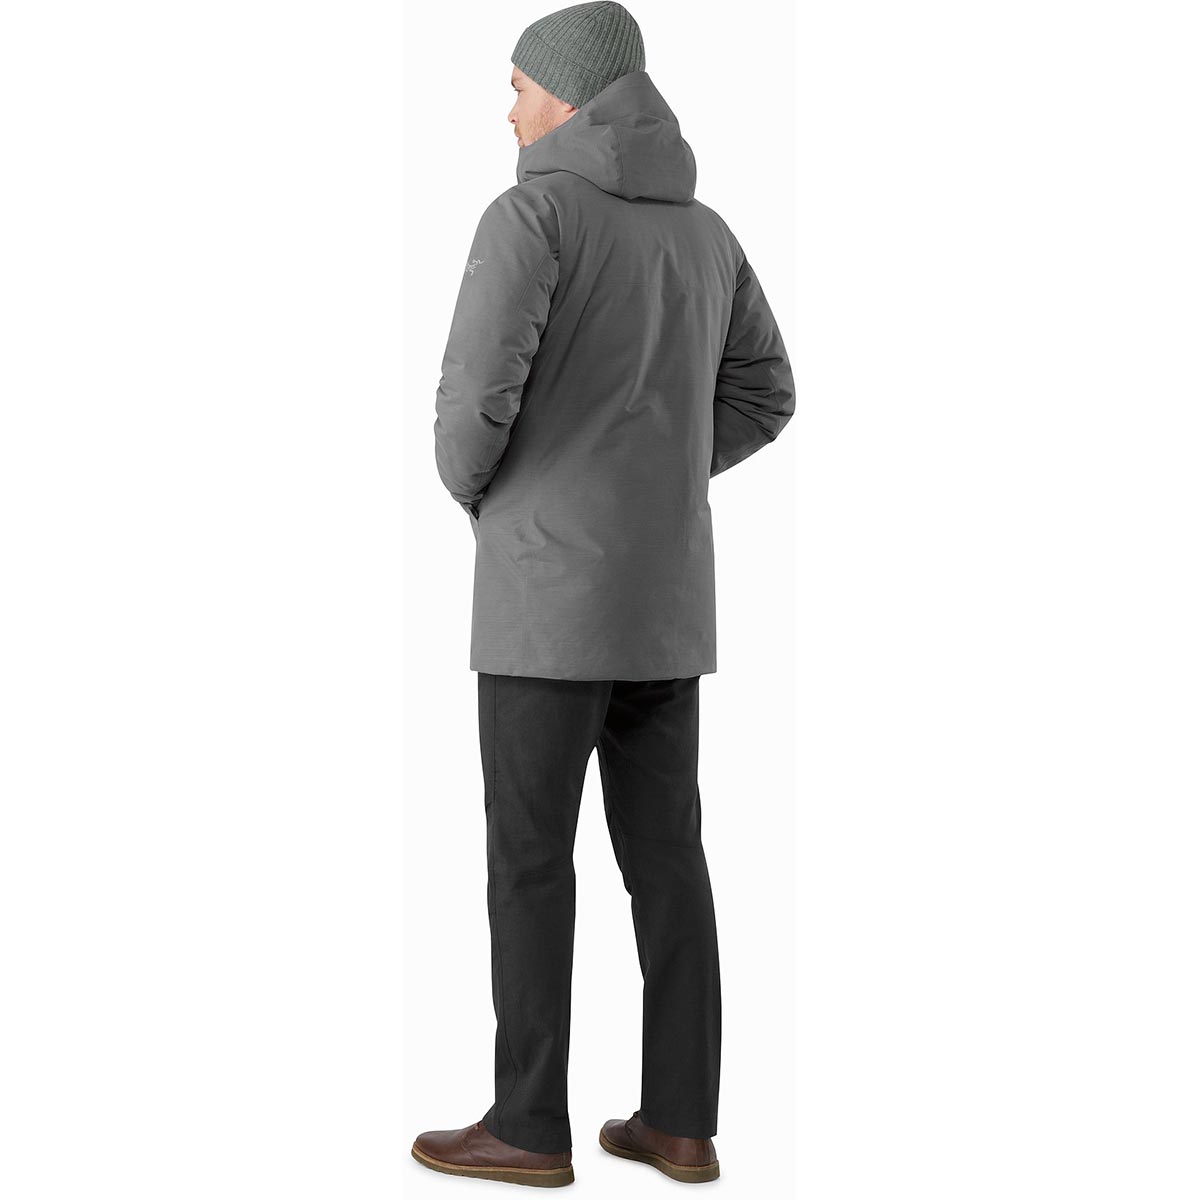 Arc'teryx Therme Parka, men's, discontinued 2016-17 colors (free 